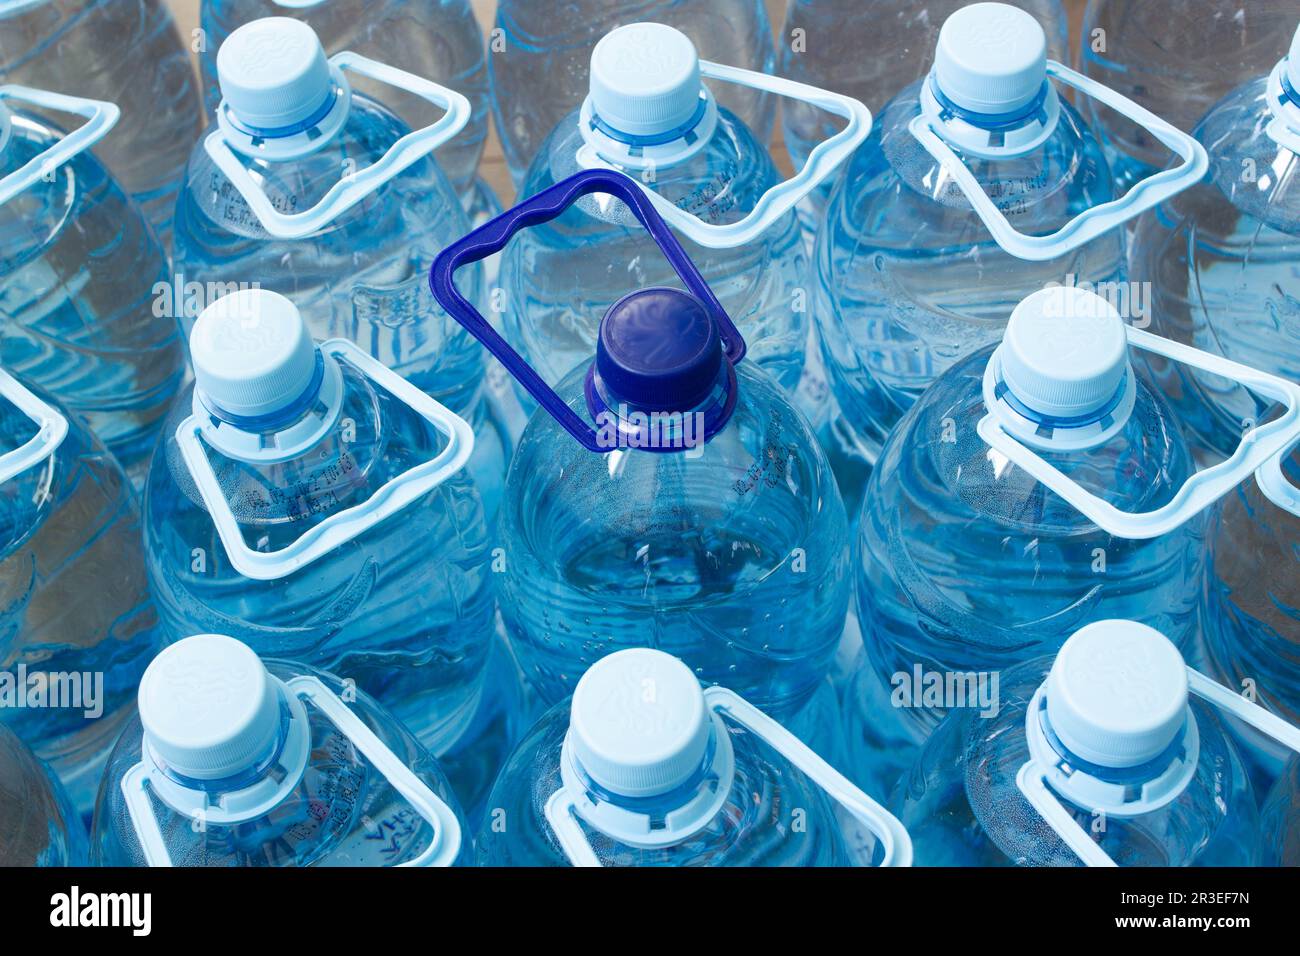 https://c8.alamy.com/comp/2R3EF7N/many-blue-plastic-bottles-with-blue-caps-and-one-with-dark-blue-cap-with-clear-mineral-water-in-a-supermarket-pure-filtered-ecologically-clean-water-2R3EF7N.jpg